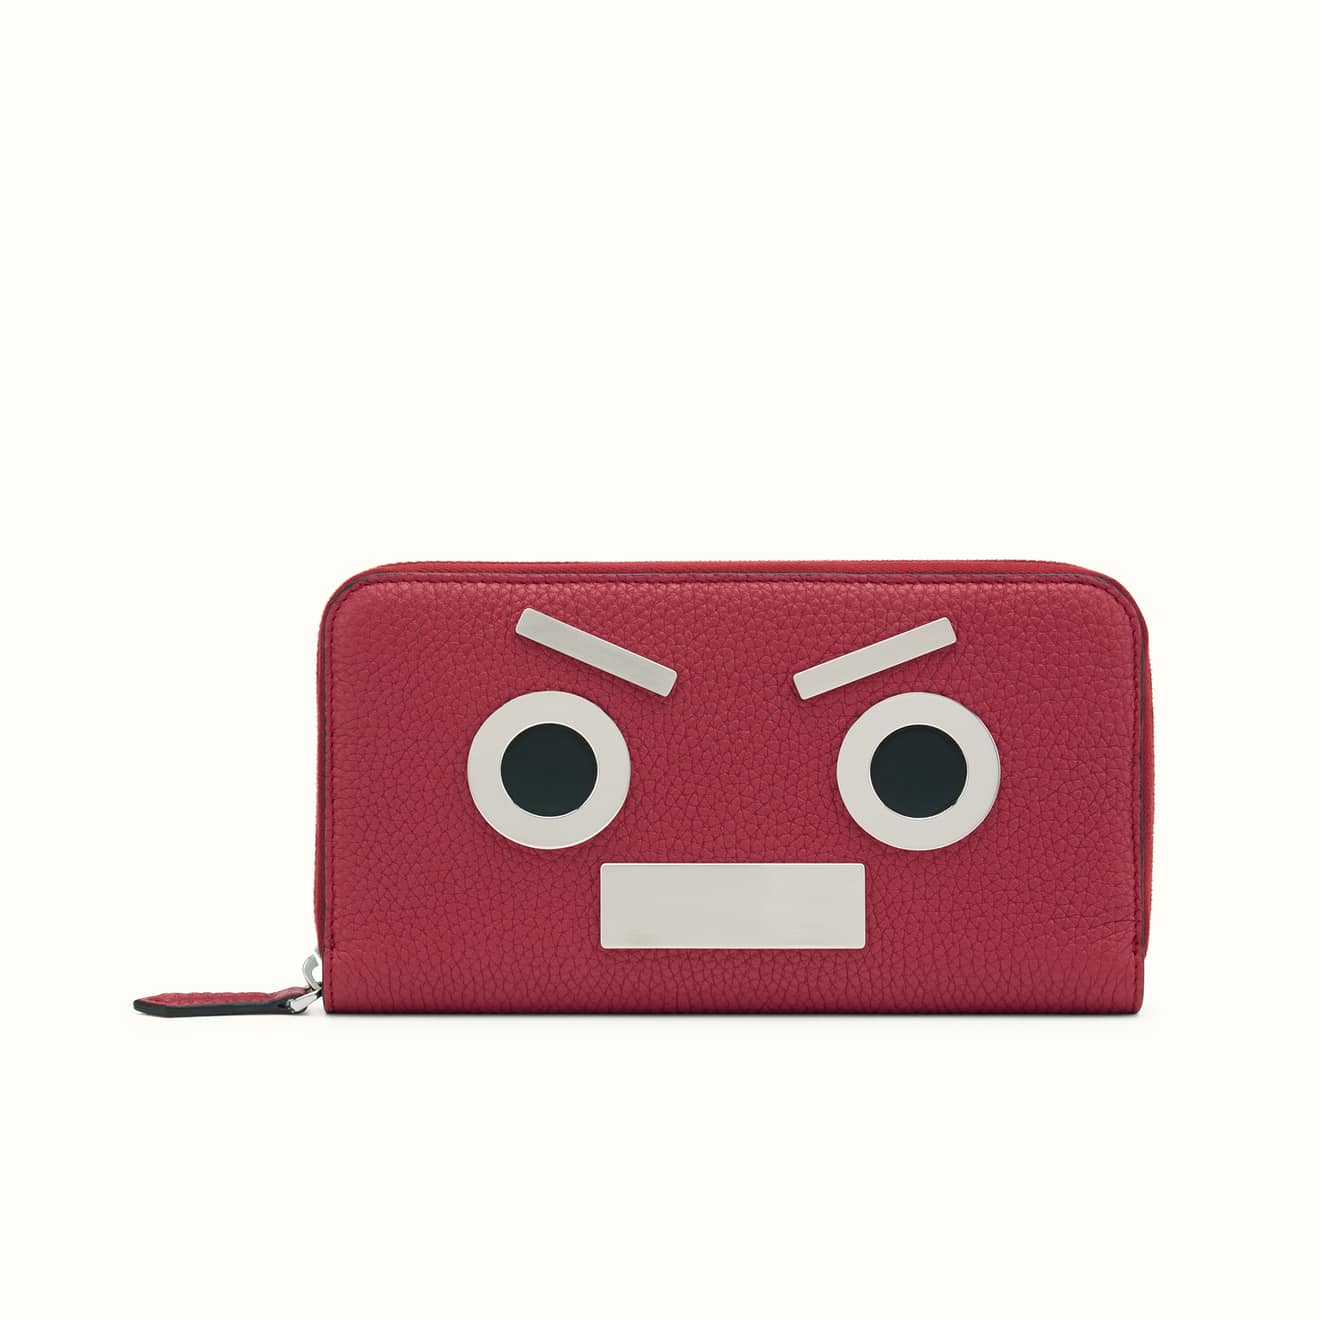 Fendi's Chinese New Year Capsule Collection - BagAddicts Anonymous